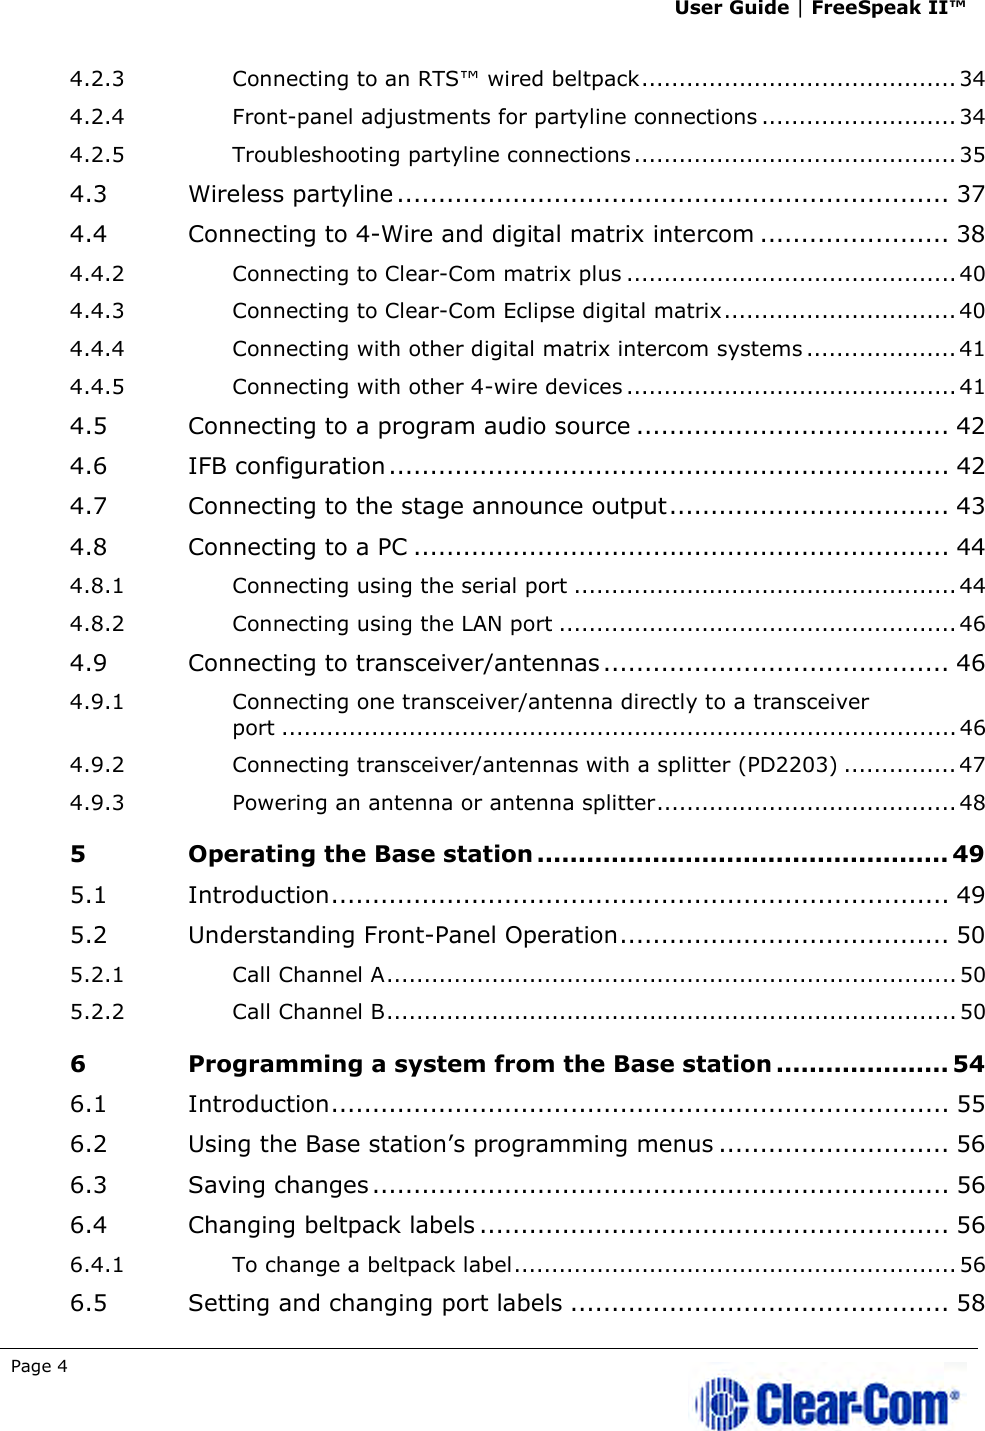 User Guide | FreeSpeak II™  Page 4   4.2.3 Connecting to an RTS™ wired beltpack .......................................... 34 4.2.4 Front-panel adjustments for partyline connections .......................... 34 4.2.5 Troubleshooting partyline connections ........................................... 35 4.3 Wireless partyline ................................................................... 37 4.4 Connecting to 4-Wire and digital matrix intercom ....................... 38 4.4.2 Connecting to Clear-Com matrix plus ............................................ 40 4.4.3 Connecting to Clear-Com Eclipse digital matrix ............................... 40 4.4.4 Connecting with other digital matrix intercom systems .................... 41 4.4.5 Connecting with other 4-wire devices ............................................ 41 4.5 Connecting to a program audio source ...................................... 42 4.6 IFB configuration .................................................................... 42 4.7 Connecting to the stage announce output .................................. 43 4.8 Connecting to a PC ................................................................. 44 4.8.1 Connecting using the serial port ................................................... 44 4.8.2 Connecting using the LAN port ..................................................... 46 4.9 Connecting to transceiver/antennas .......................................... 46 4.9.1 Connecting one transceiver/antenna directly to a transceiver port .......................................................................................... 46 4.9.2 Connecting transceiver/antennas with a splitter (PD2203) ............... 47 4.9.3 Powering an antenna or antenna splitter ........................................ 48 5 Operating the Base station .................................................. 49 5.1 Introduction ........................................................................... 49 5.2 Understanding Front-Panel Operation ........................................ 50 5.2.1 Call Channel A ............................................................................ 50 5.2.2 Call Channel B ............................................................................ 50 6 Programming a system from the Base station ..................... 54 6.1 Introduction ........................................................................... 55 6.2 Using the Base station’s programming menus ............................ 56 6.3 Saving changes ...................................................................... 56 6.4 Changing beltpack labels ......................................................... 56 6.4.1 To change a beltpack label ........................................................... 56 6.5 Setting and changing port labels .............................................. 58 